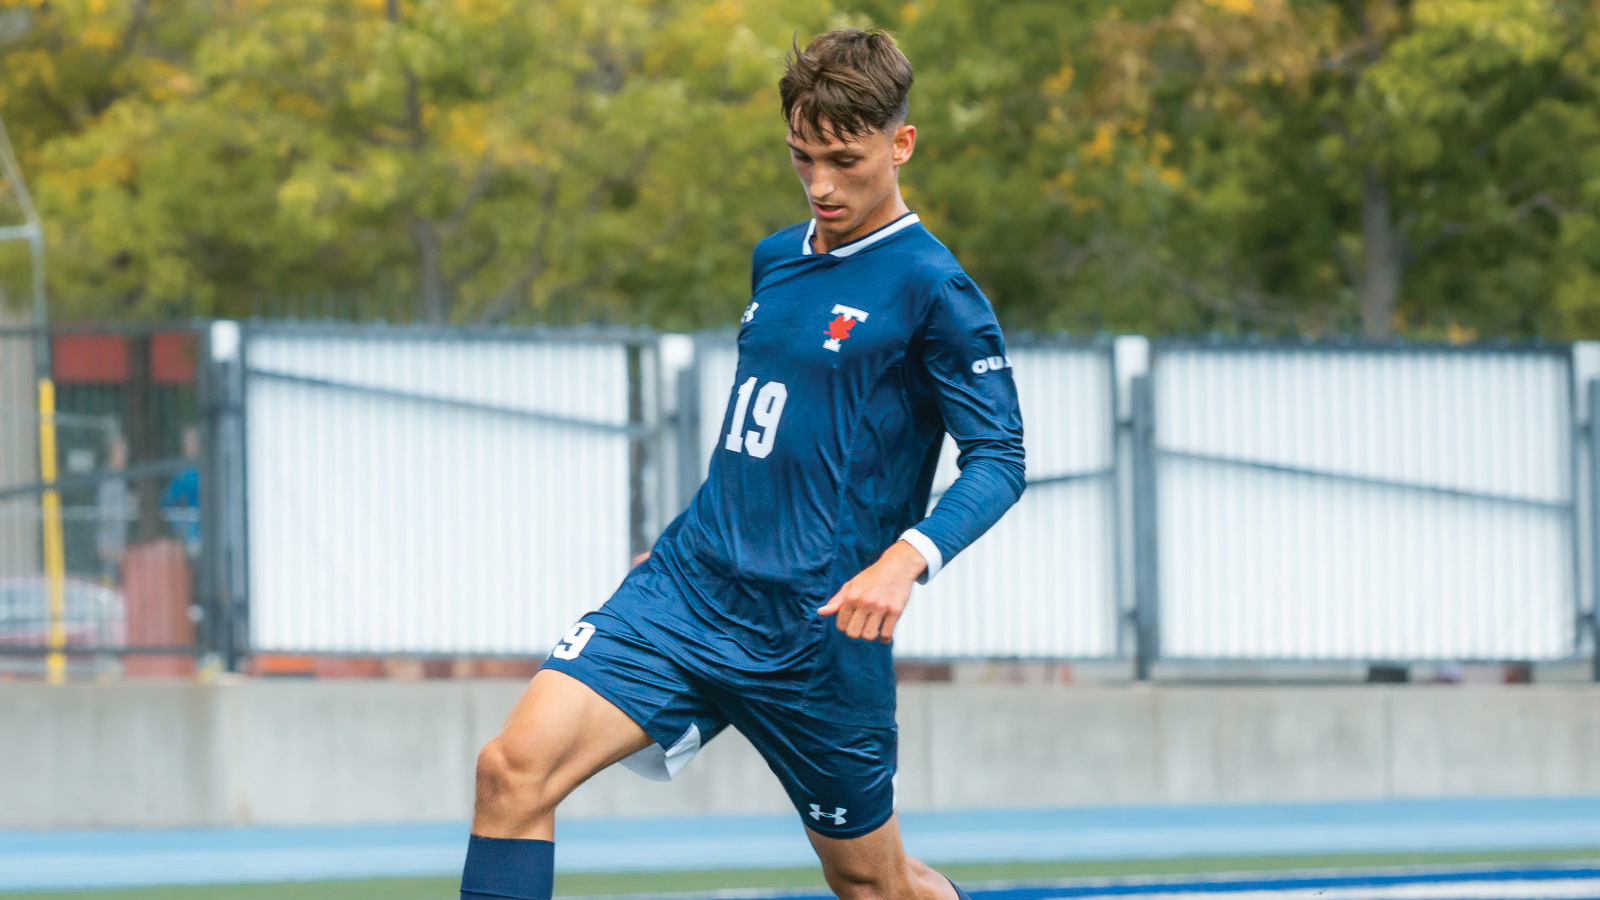 Toronto men's soccer player Michael Maslanka looking down toward the field with the ball at his feet during a game